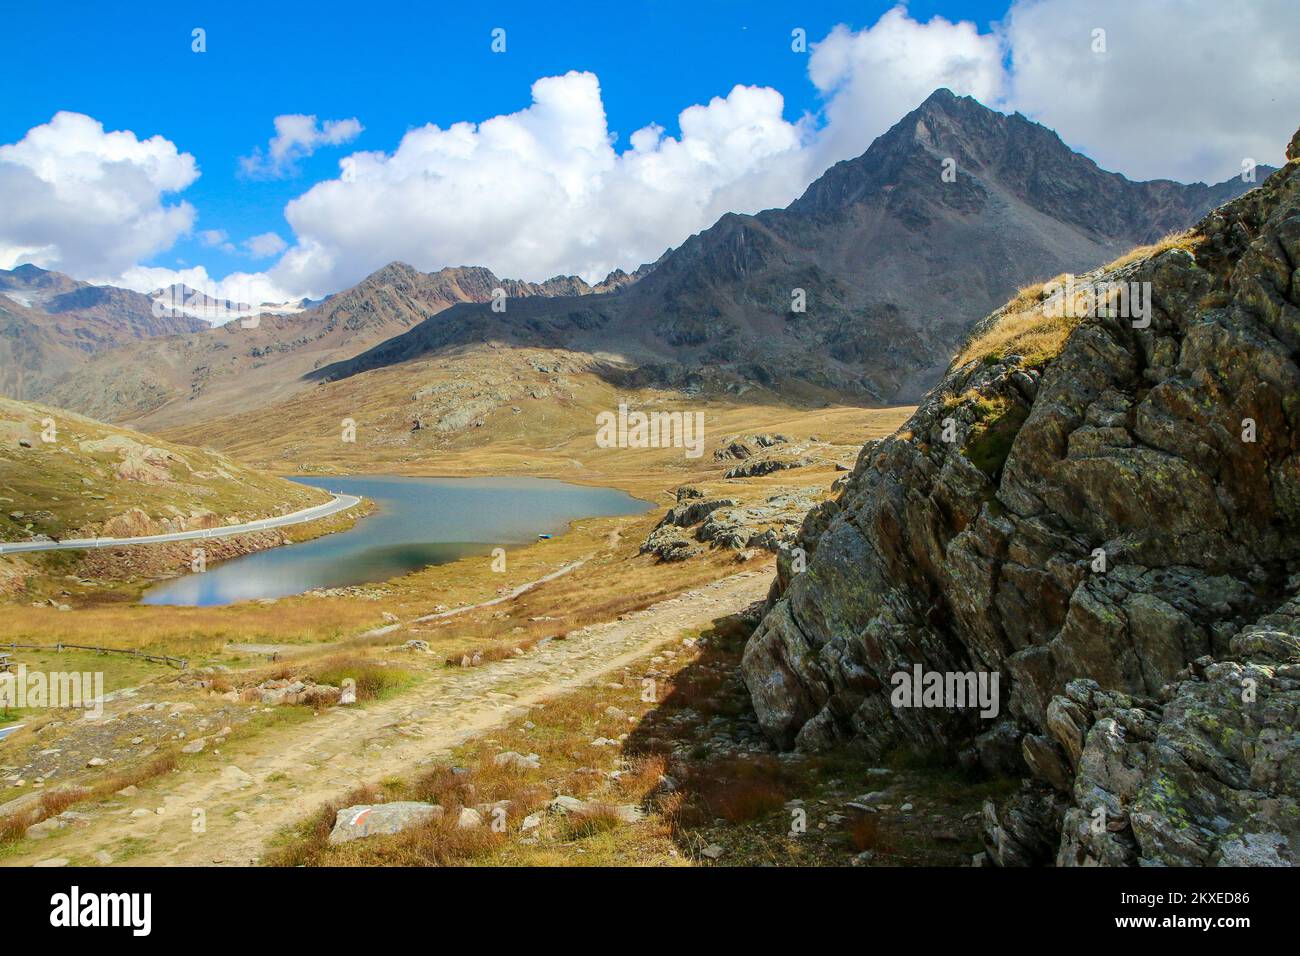 The scenic view of the italian Alps at the Passo di Gavia summit. Nice peaks and a lake below during the sunny day. Stock Photo